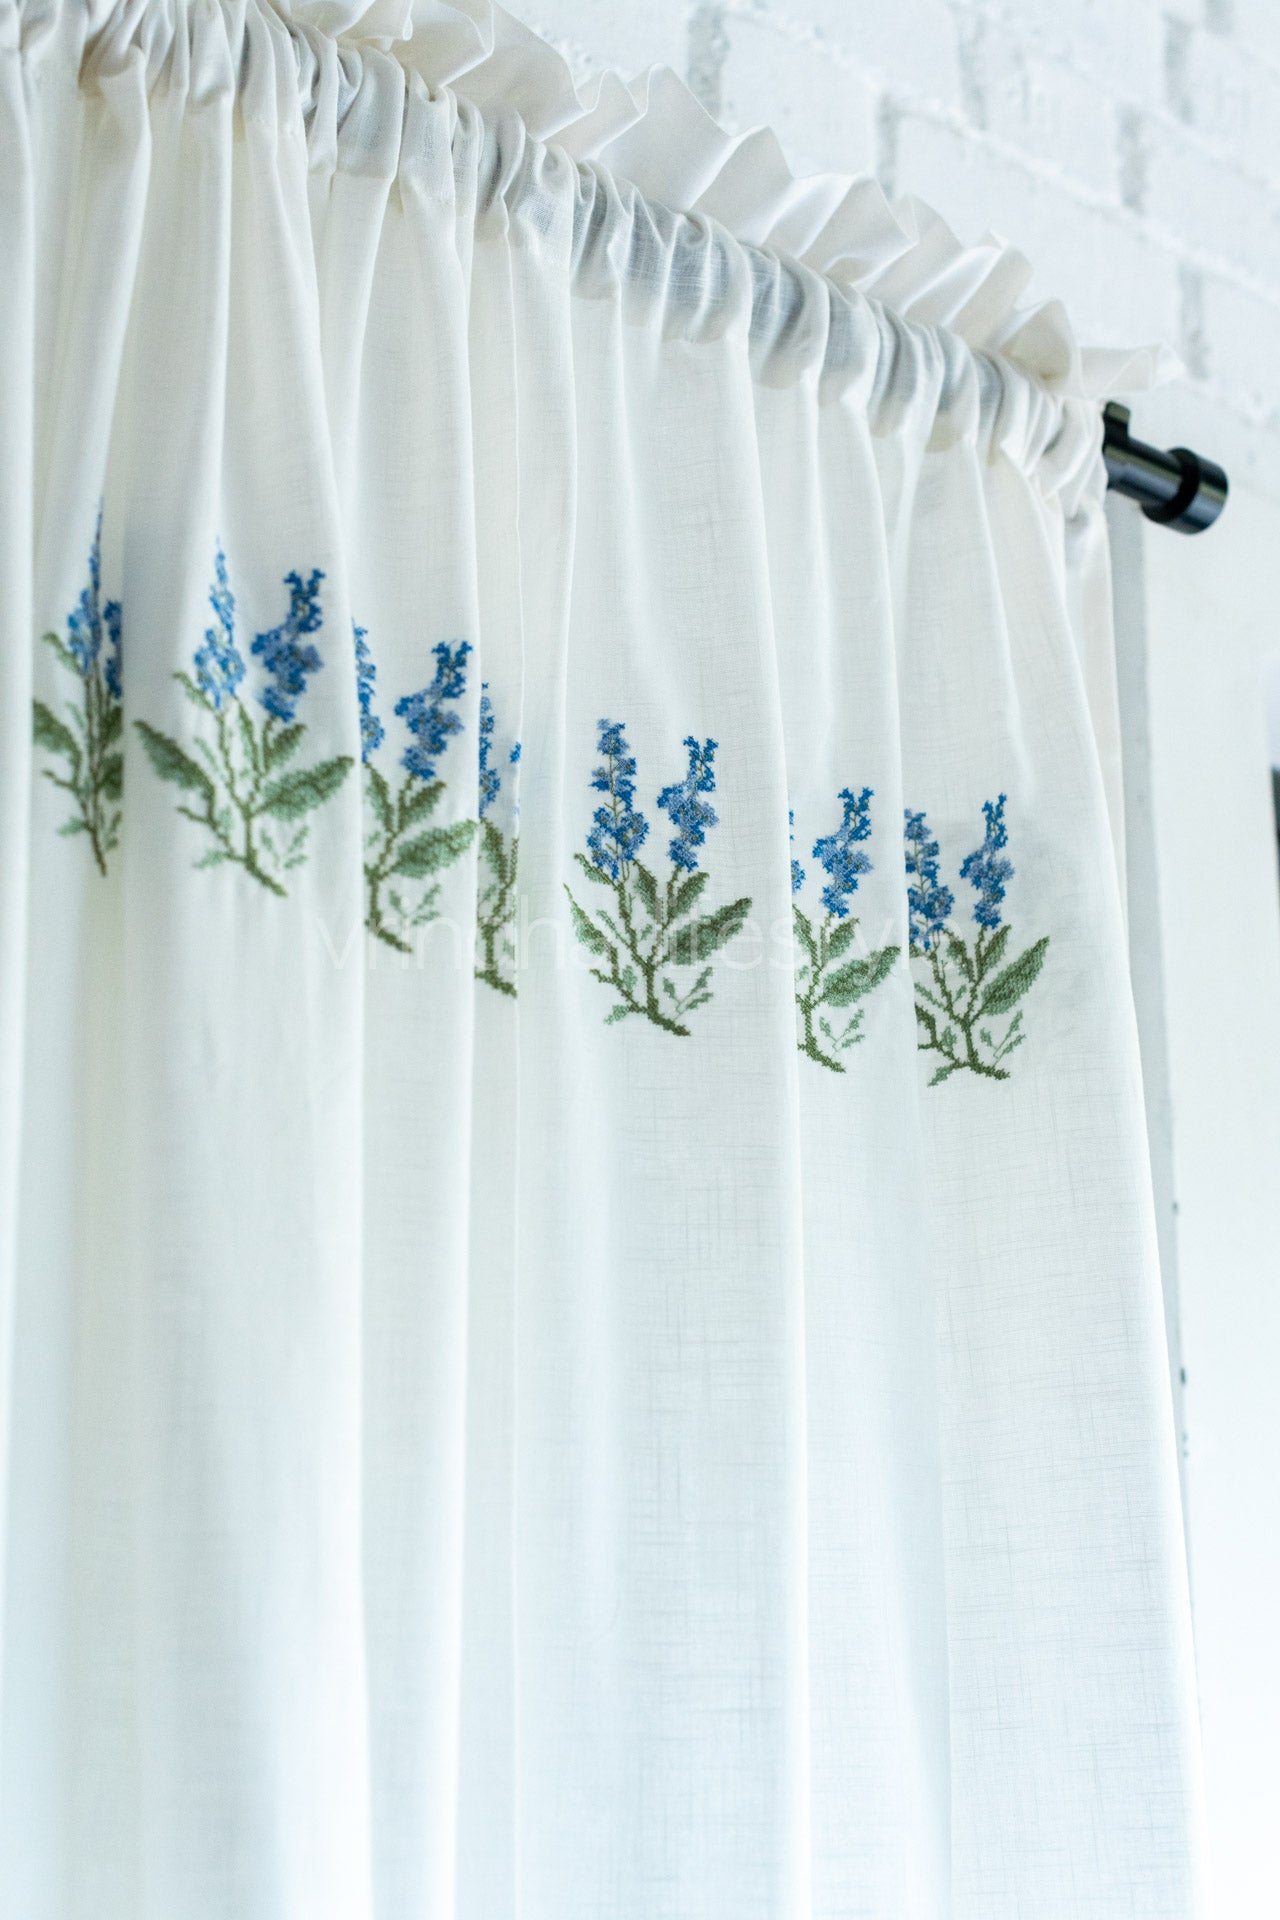 COTTON SHEER CURTAINS with cross stitch embroidery -7 Feet-Single unit(Customisable )-Rod pocket curtain